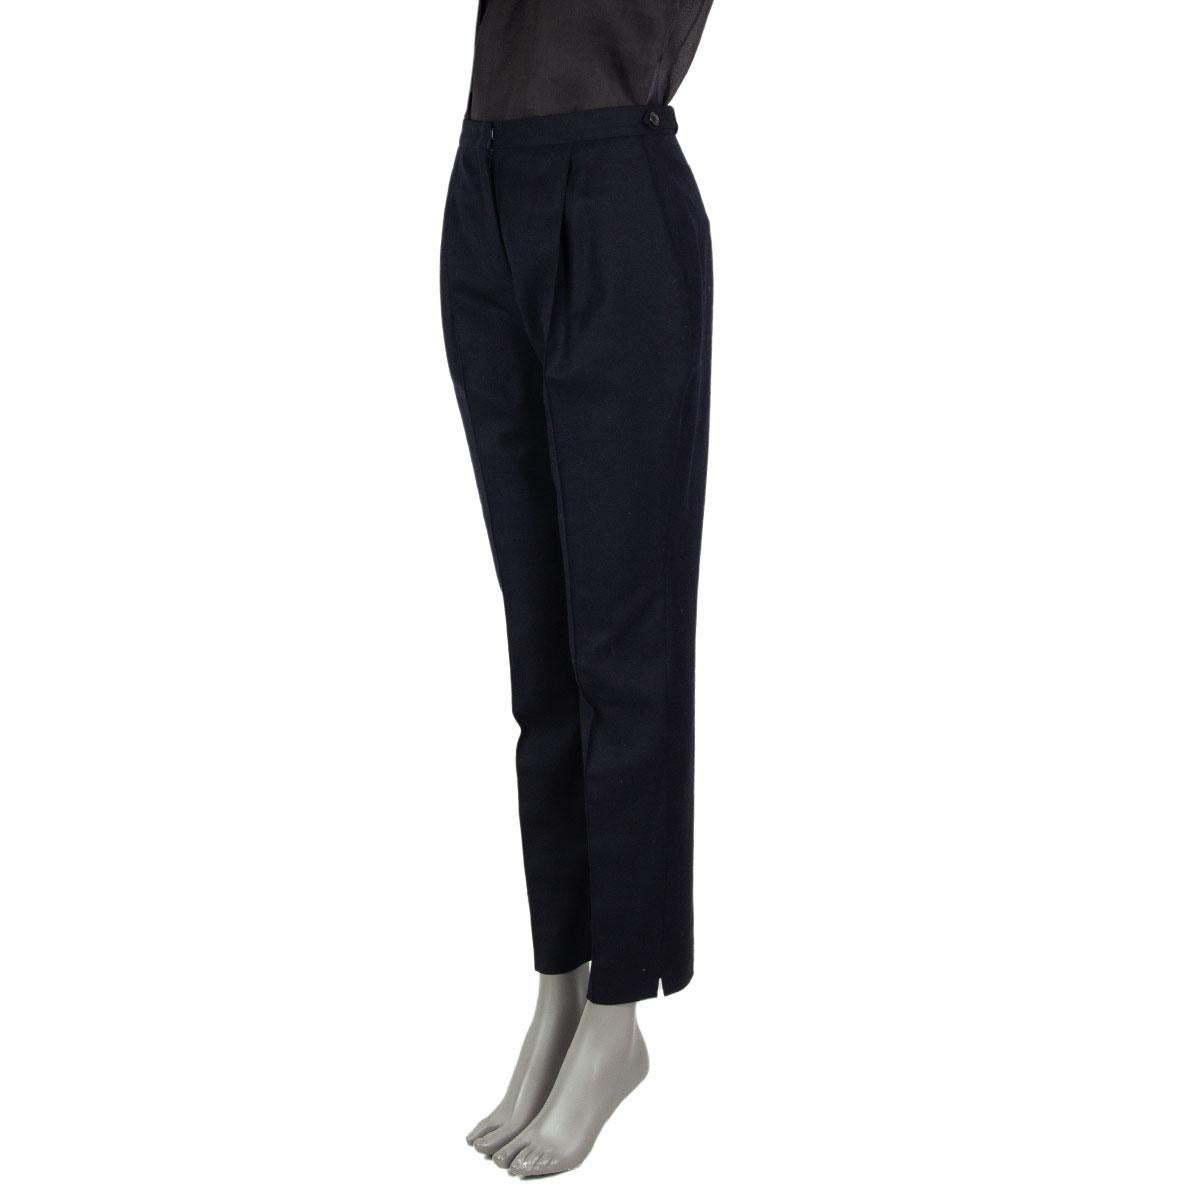 Jil Sander tapered pants in night blue wool (94%), cashmere (5%) and elastane (1%) with slit pockets. Opens with one hook and a zipper on the front. Has been worn and is in excellent condition.

Tag Size 38
Size M
Waist 74cm (28.9in)
Hips 92cm